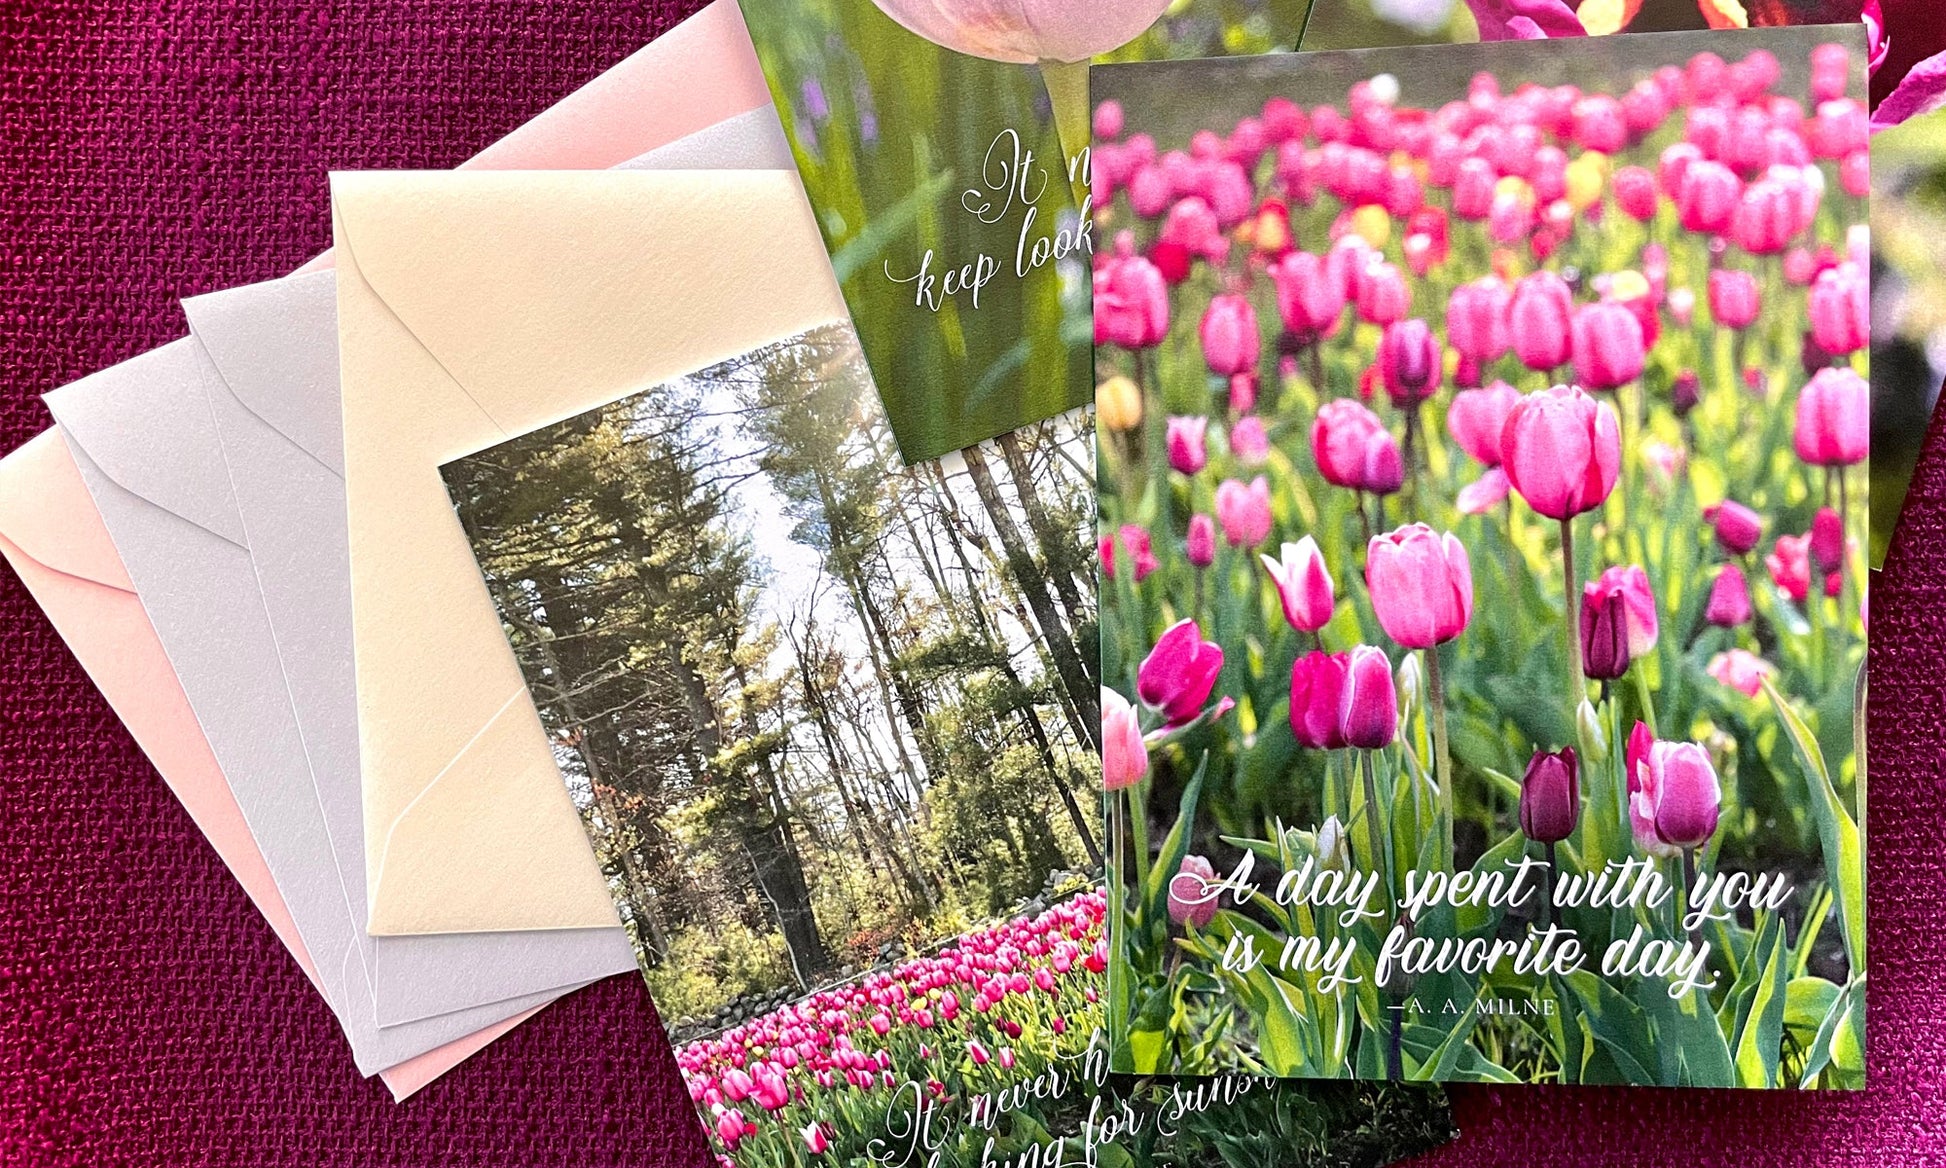 Tulip greeting cards and euro flap envelopes featuring photography by Kristina Petrilli of tulips grown in the backyard and at Wicked Tulips Flower Farm in Rhode Island.